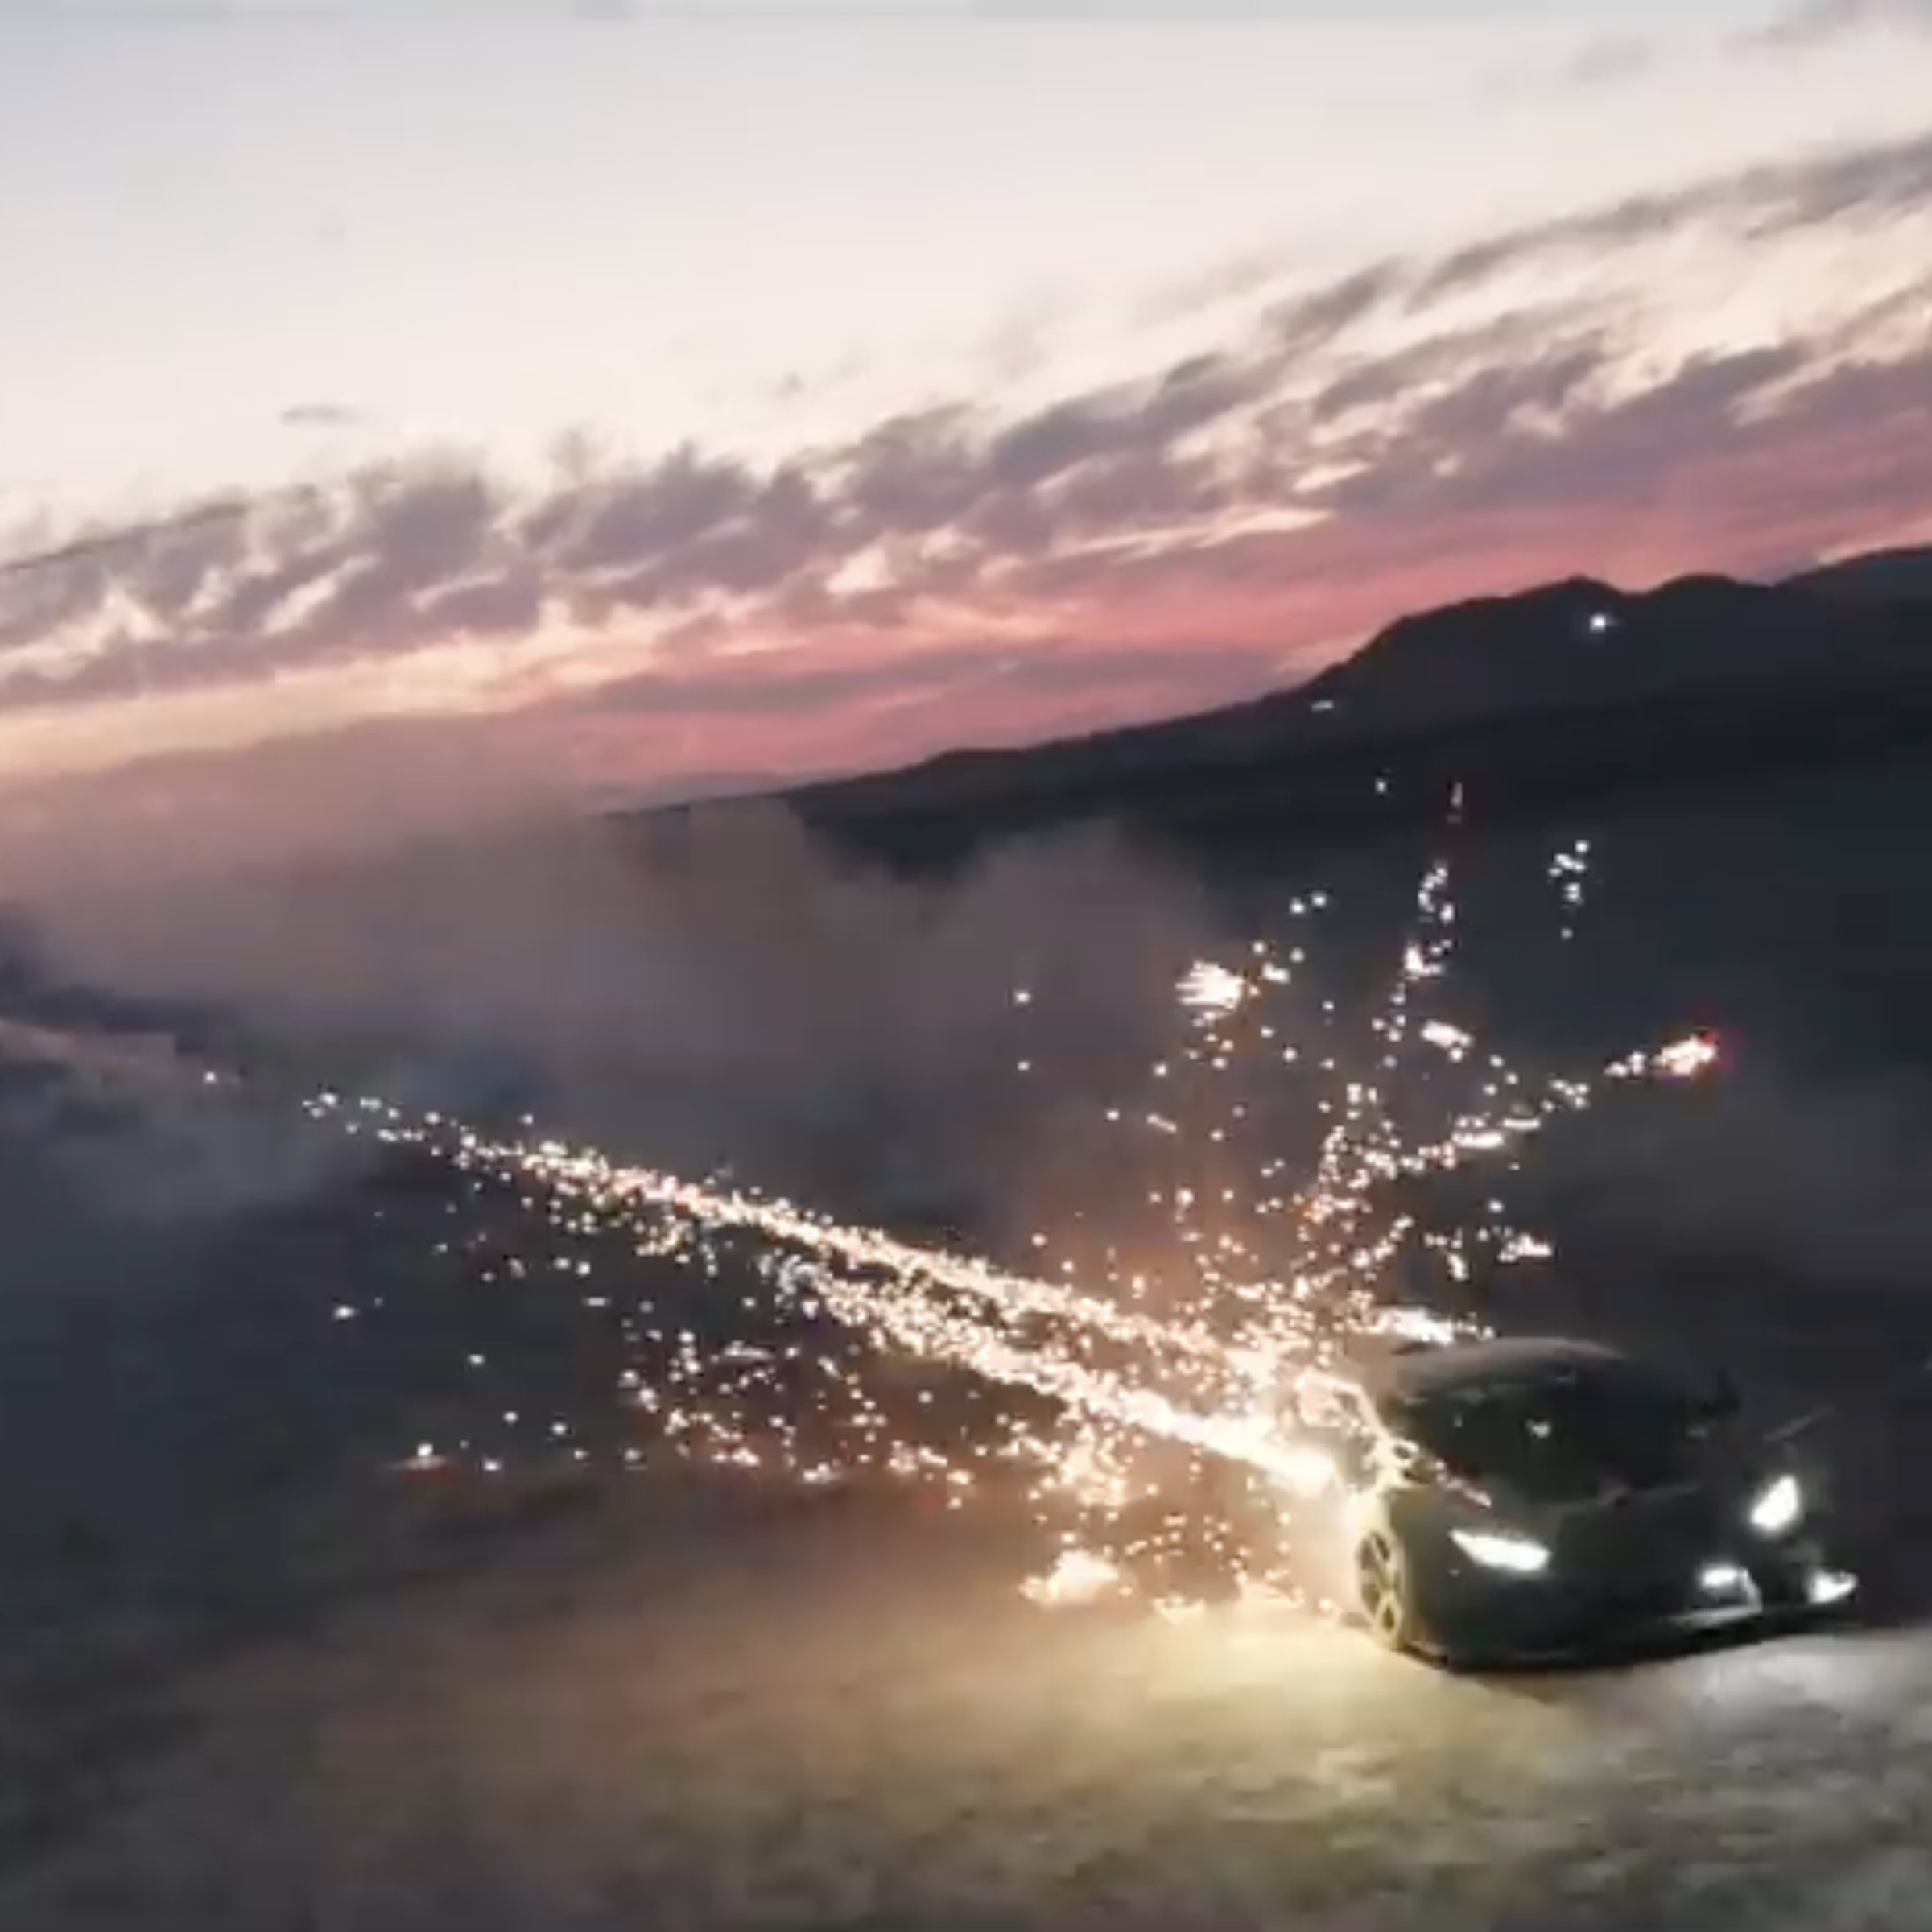 A screenshot from Alex Choi’s video showing a helicopter shooting fireworks at a Lamborghini.